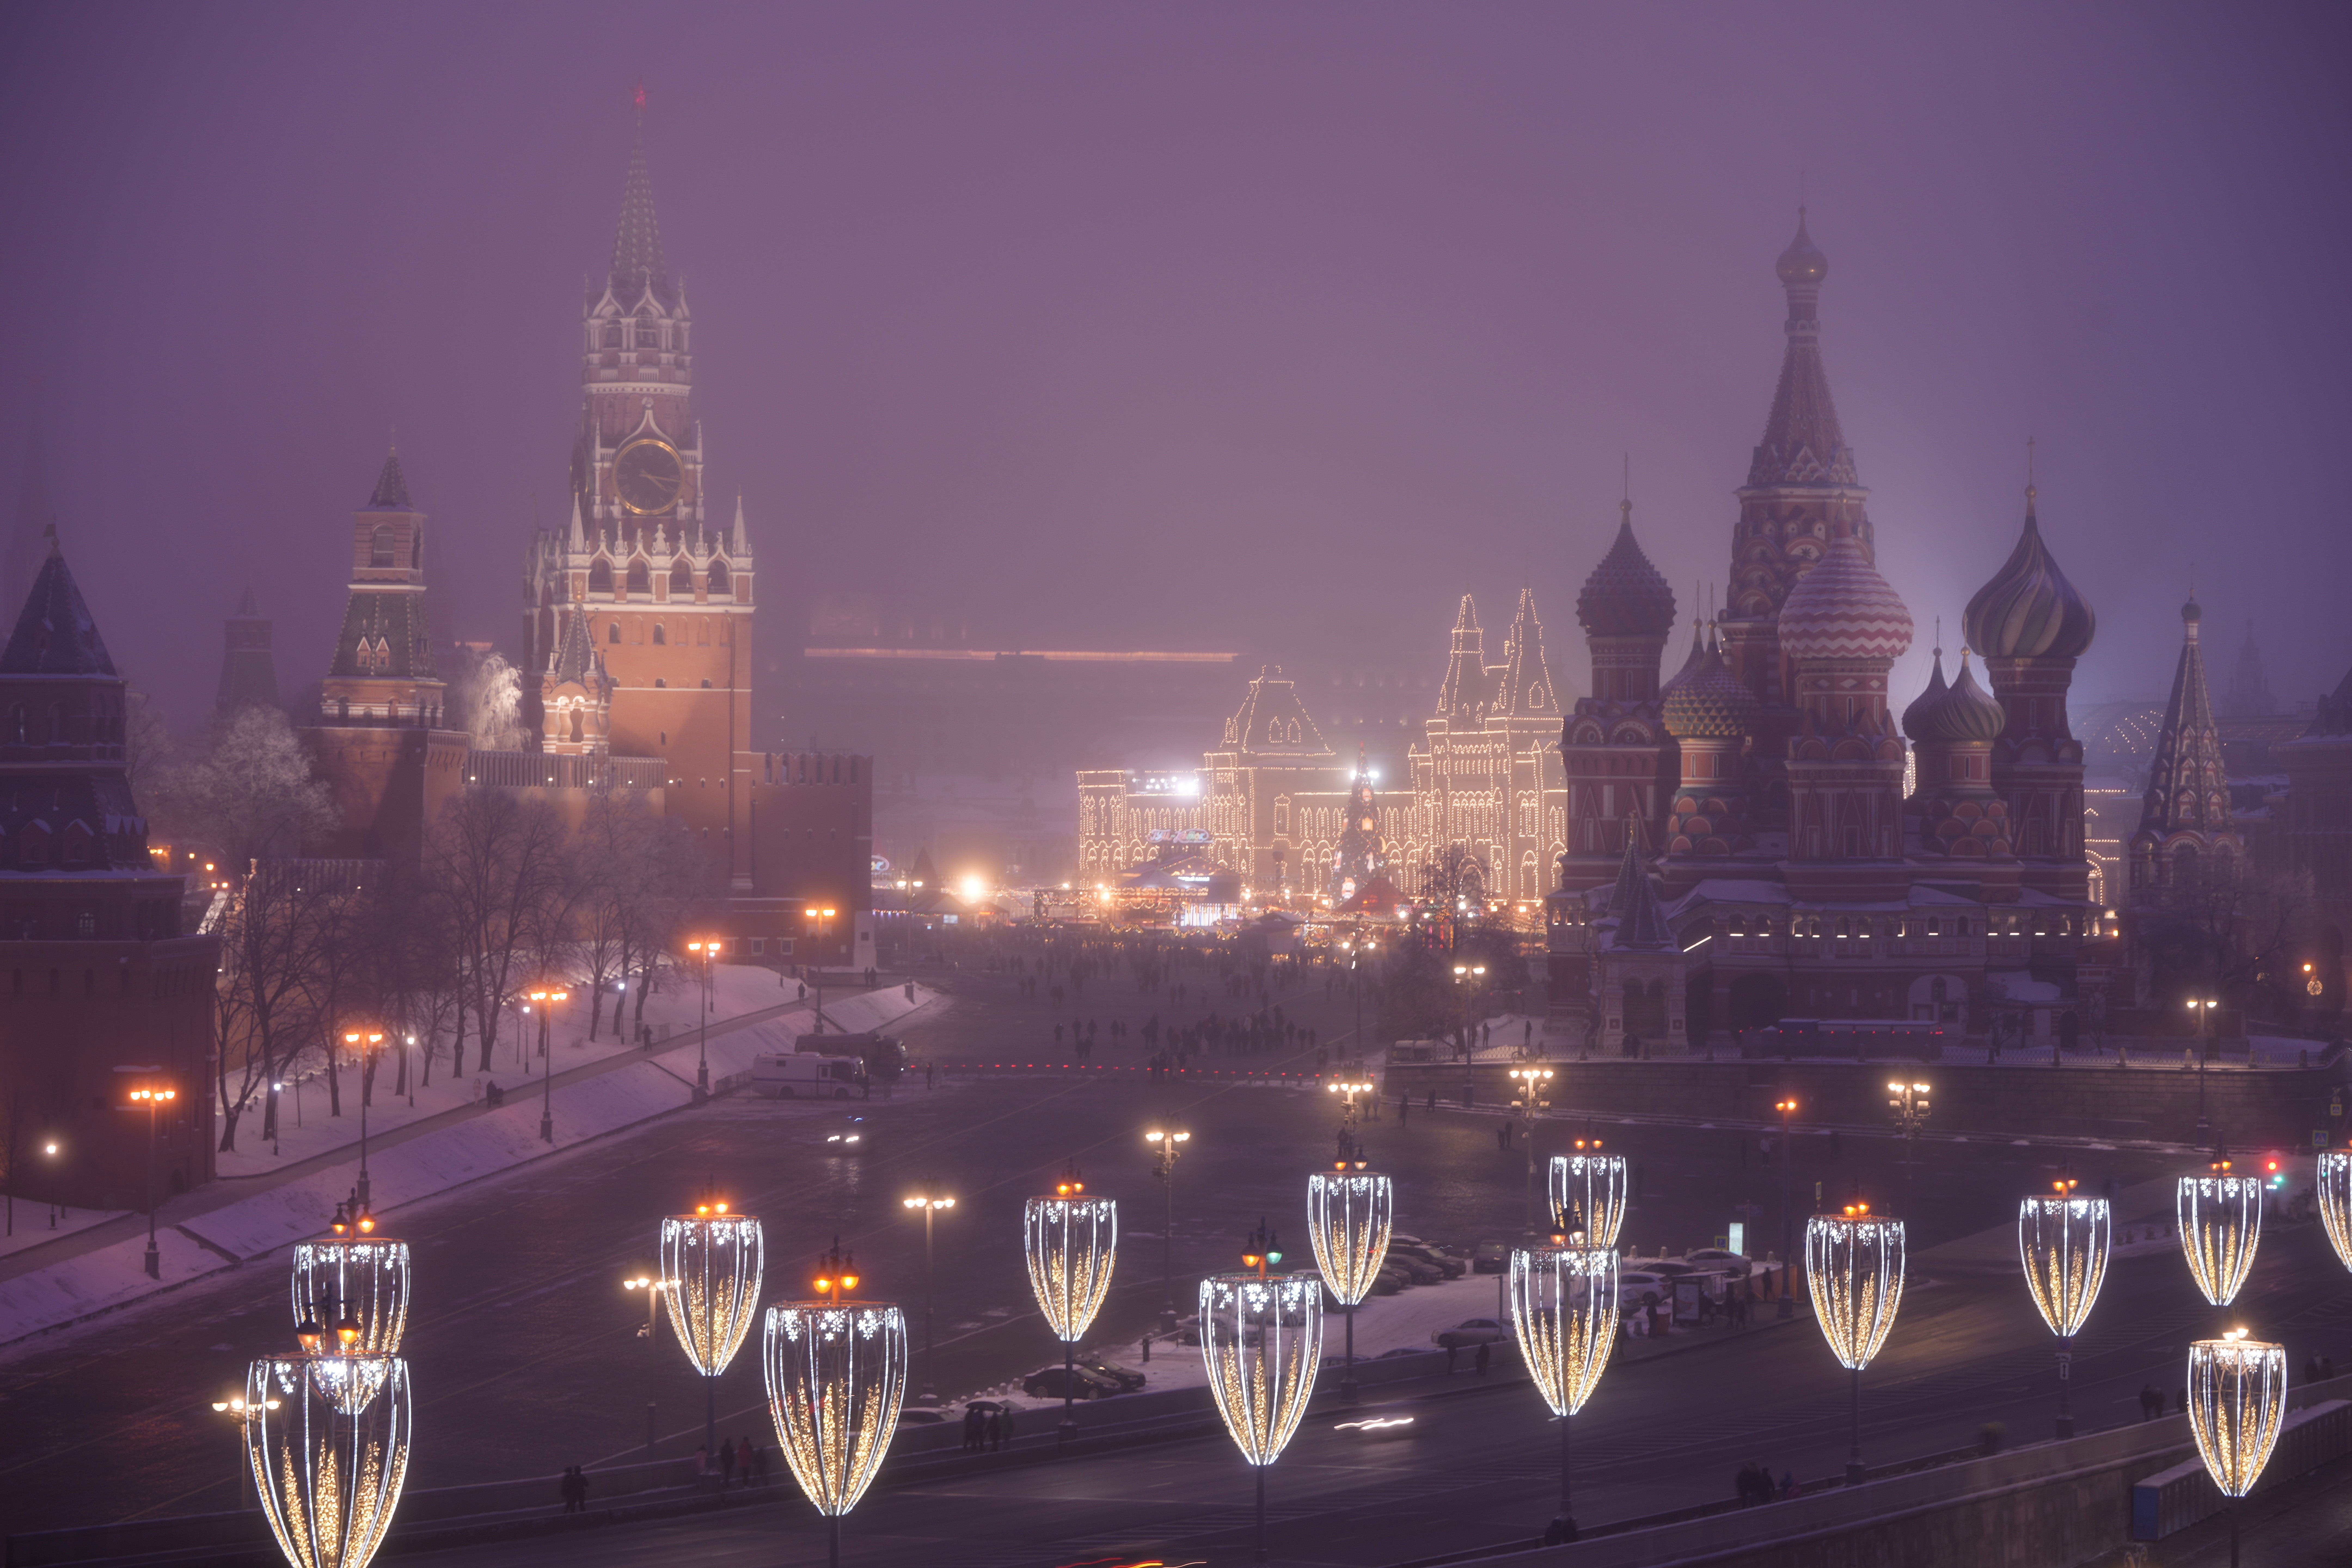 Moscow in the fog